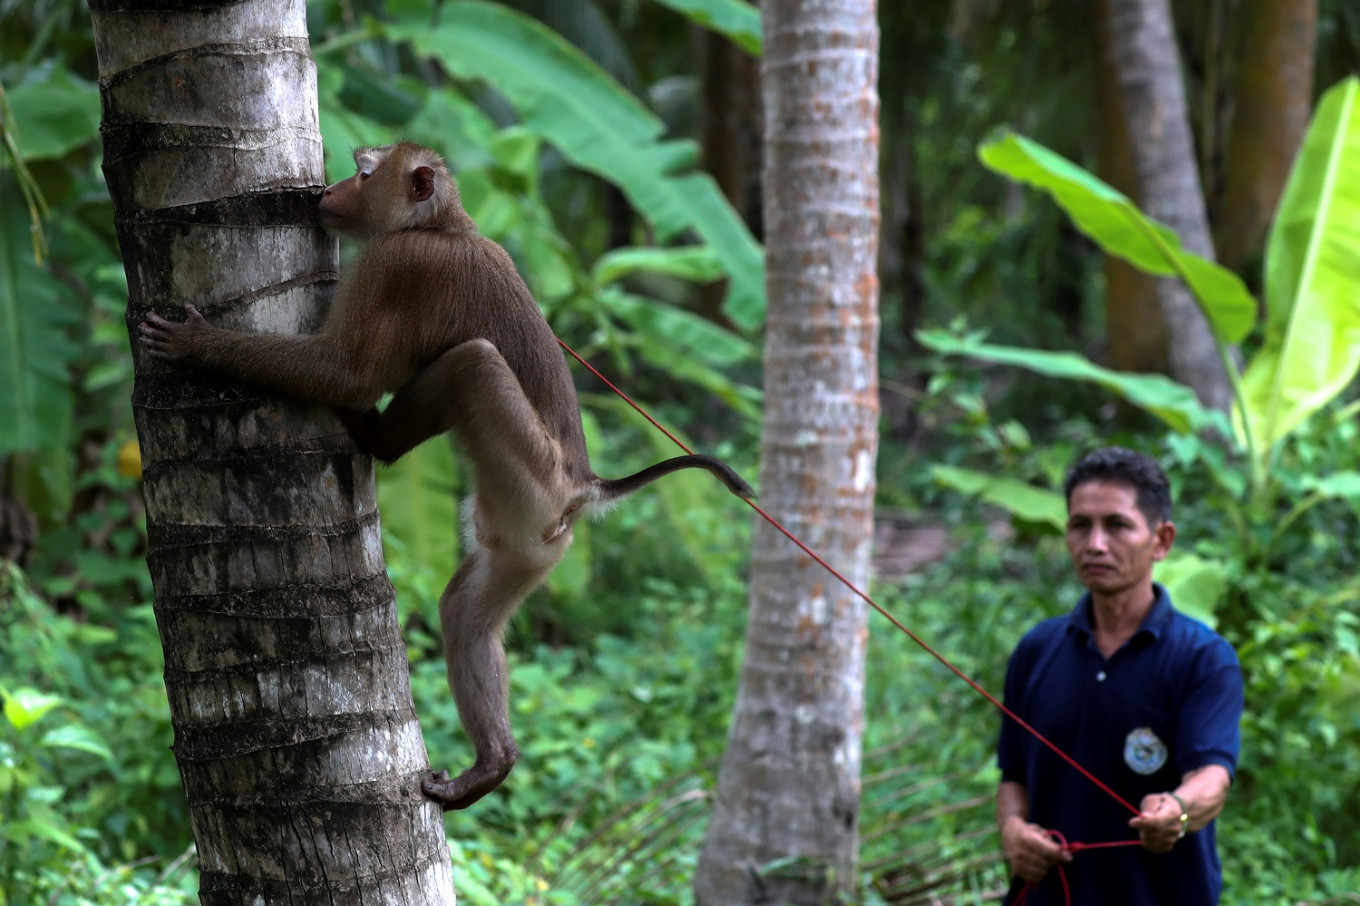 Thai monkey trainer rejects PETA claims on coconut harvesting - Environment  - The Jakarta Post